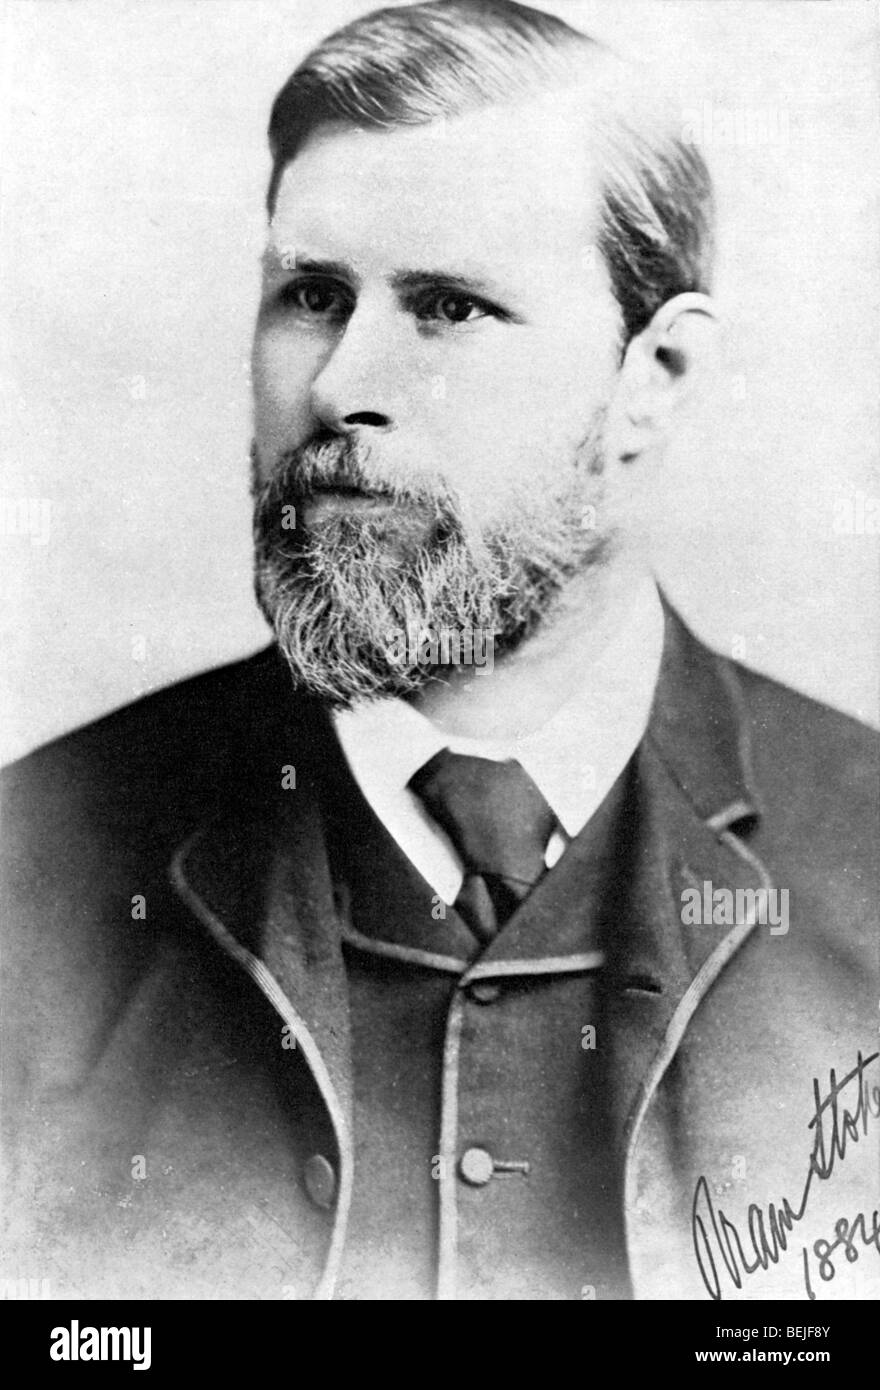 Bram Stoker, 1884 photographic portrait of the Vicotorian Anglo-Irish author who wrote the horror classic book Dracula Stock Photo